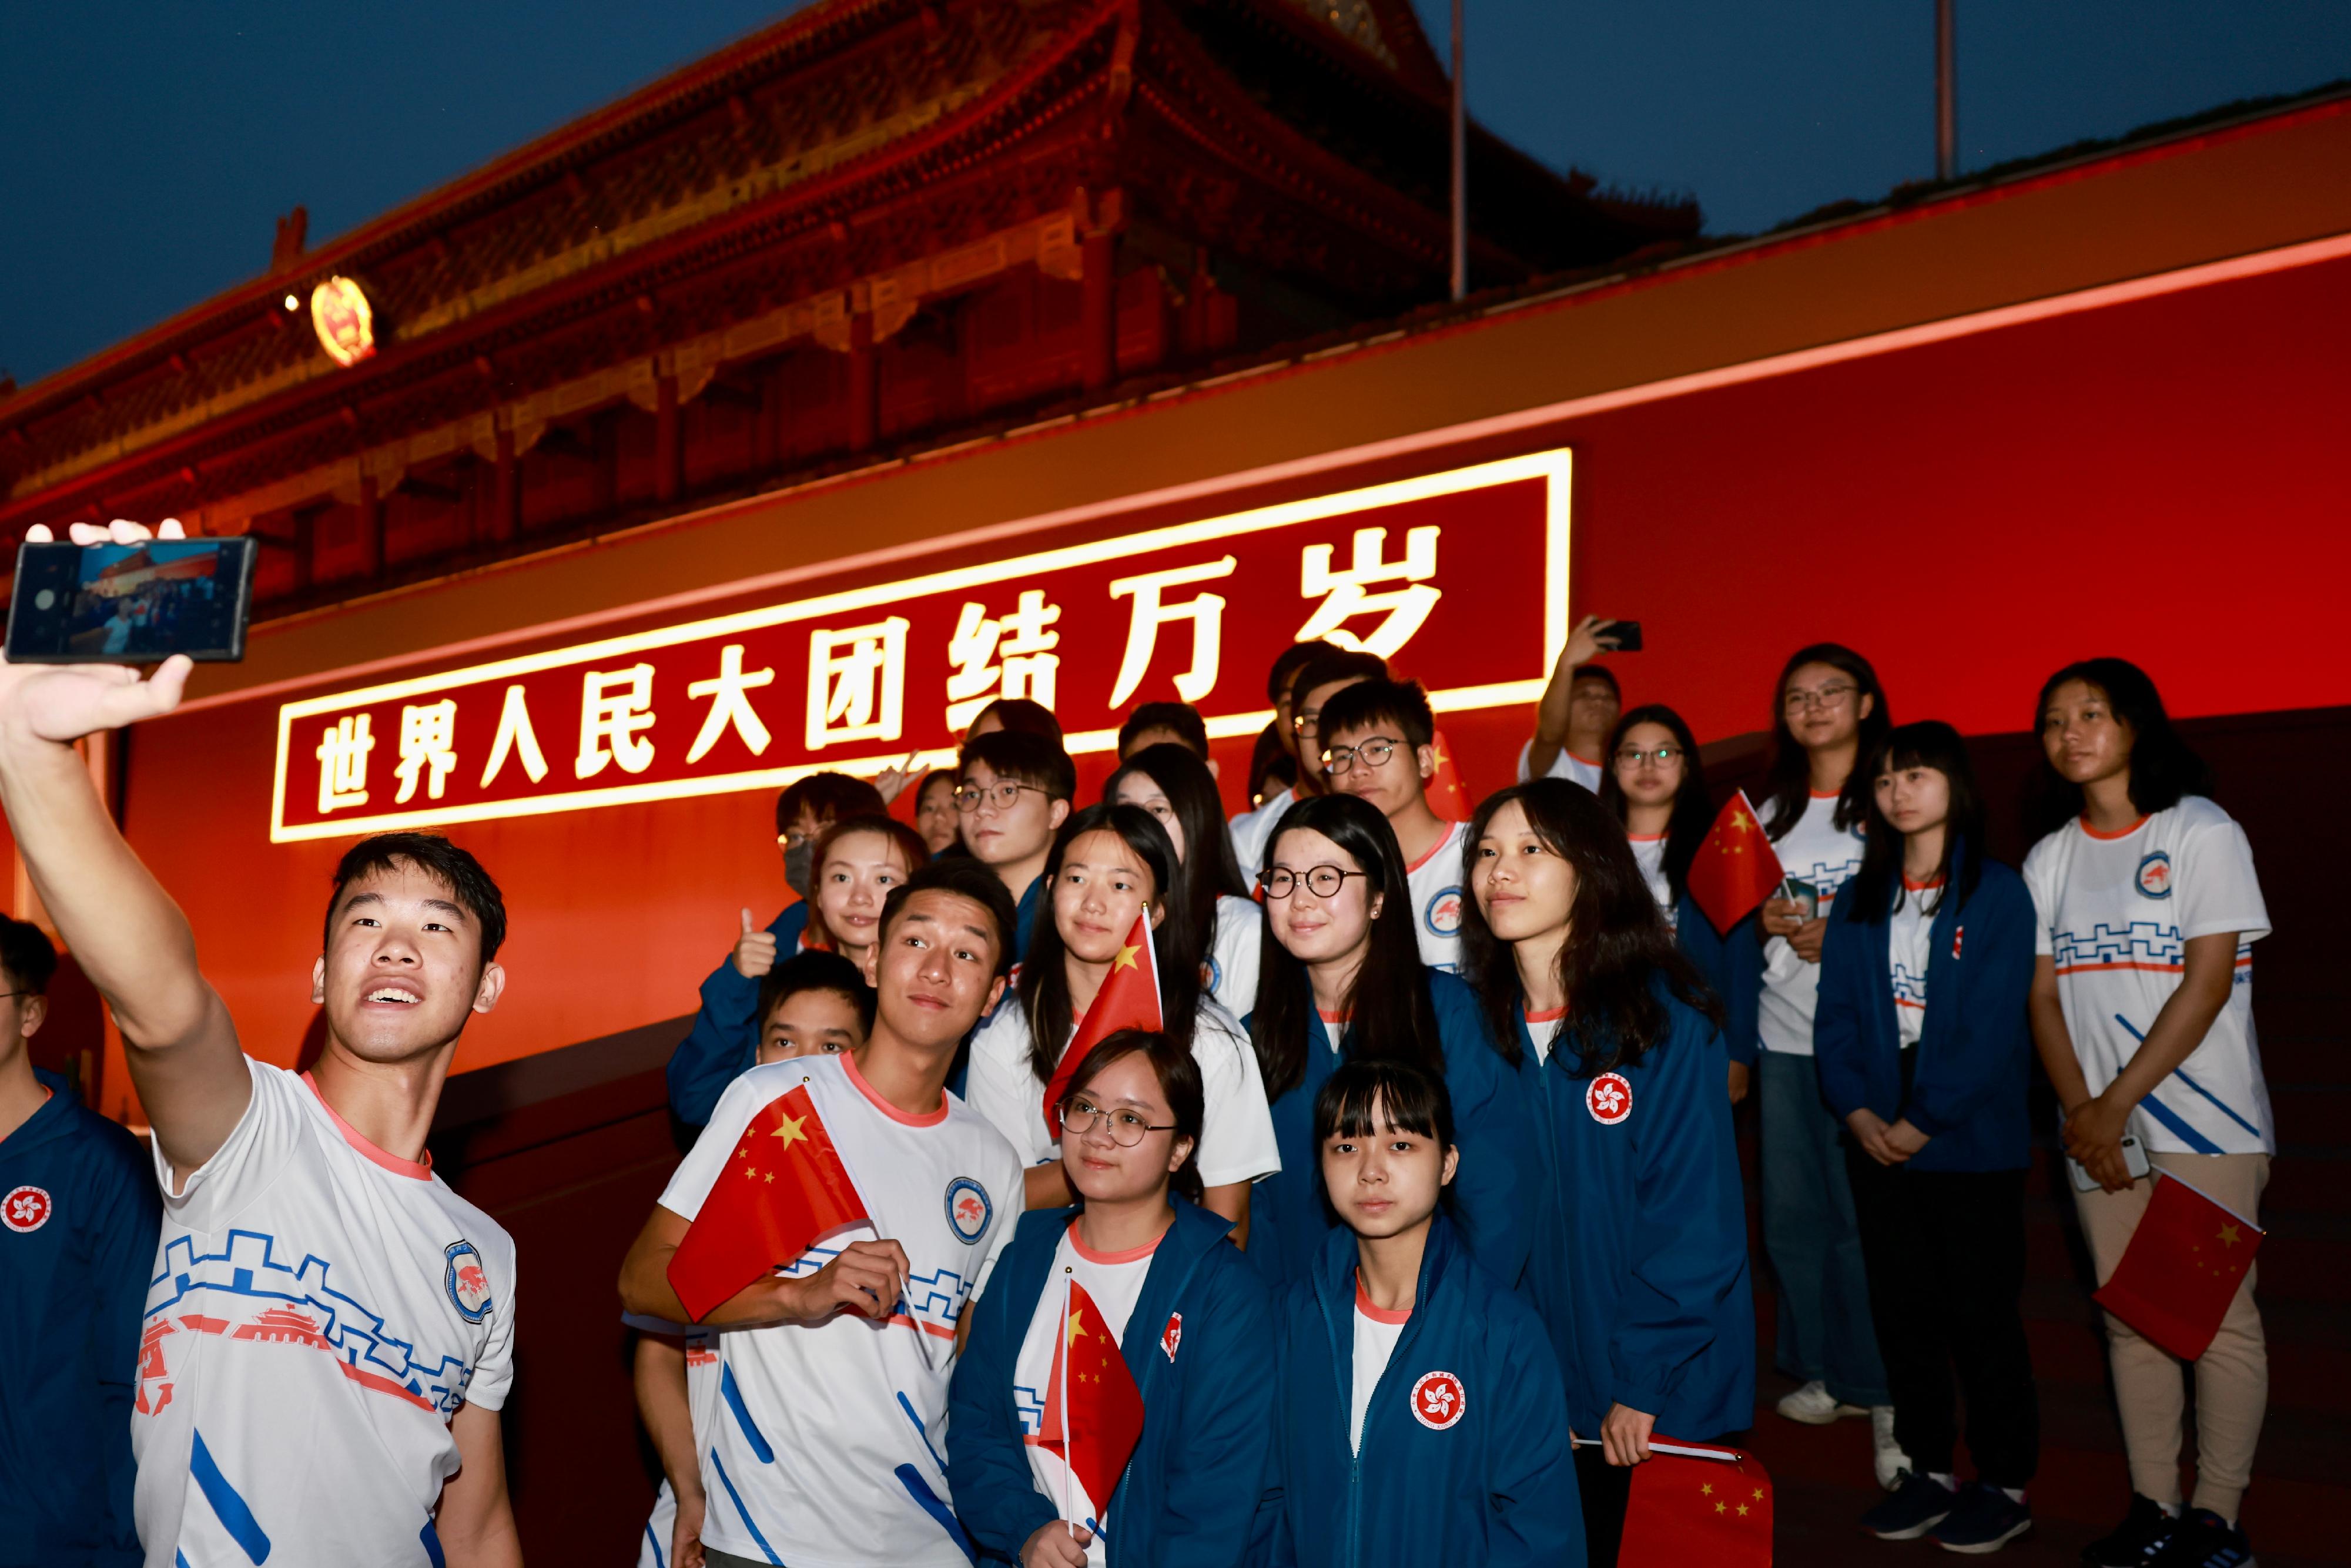 Secretary for Security, Mr Tang Ping-keung, led members of the Security Bureau Youth Uniformed Group Leaders Forum to continue visit to Beijing. Photo shows youth group members watching the flag-raising ceremony at Tiananmen Square to feel the affection for home and country on August 20.